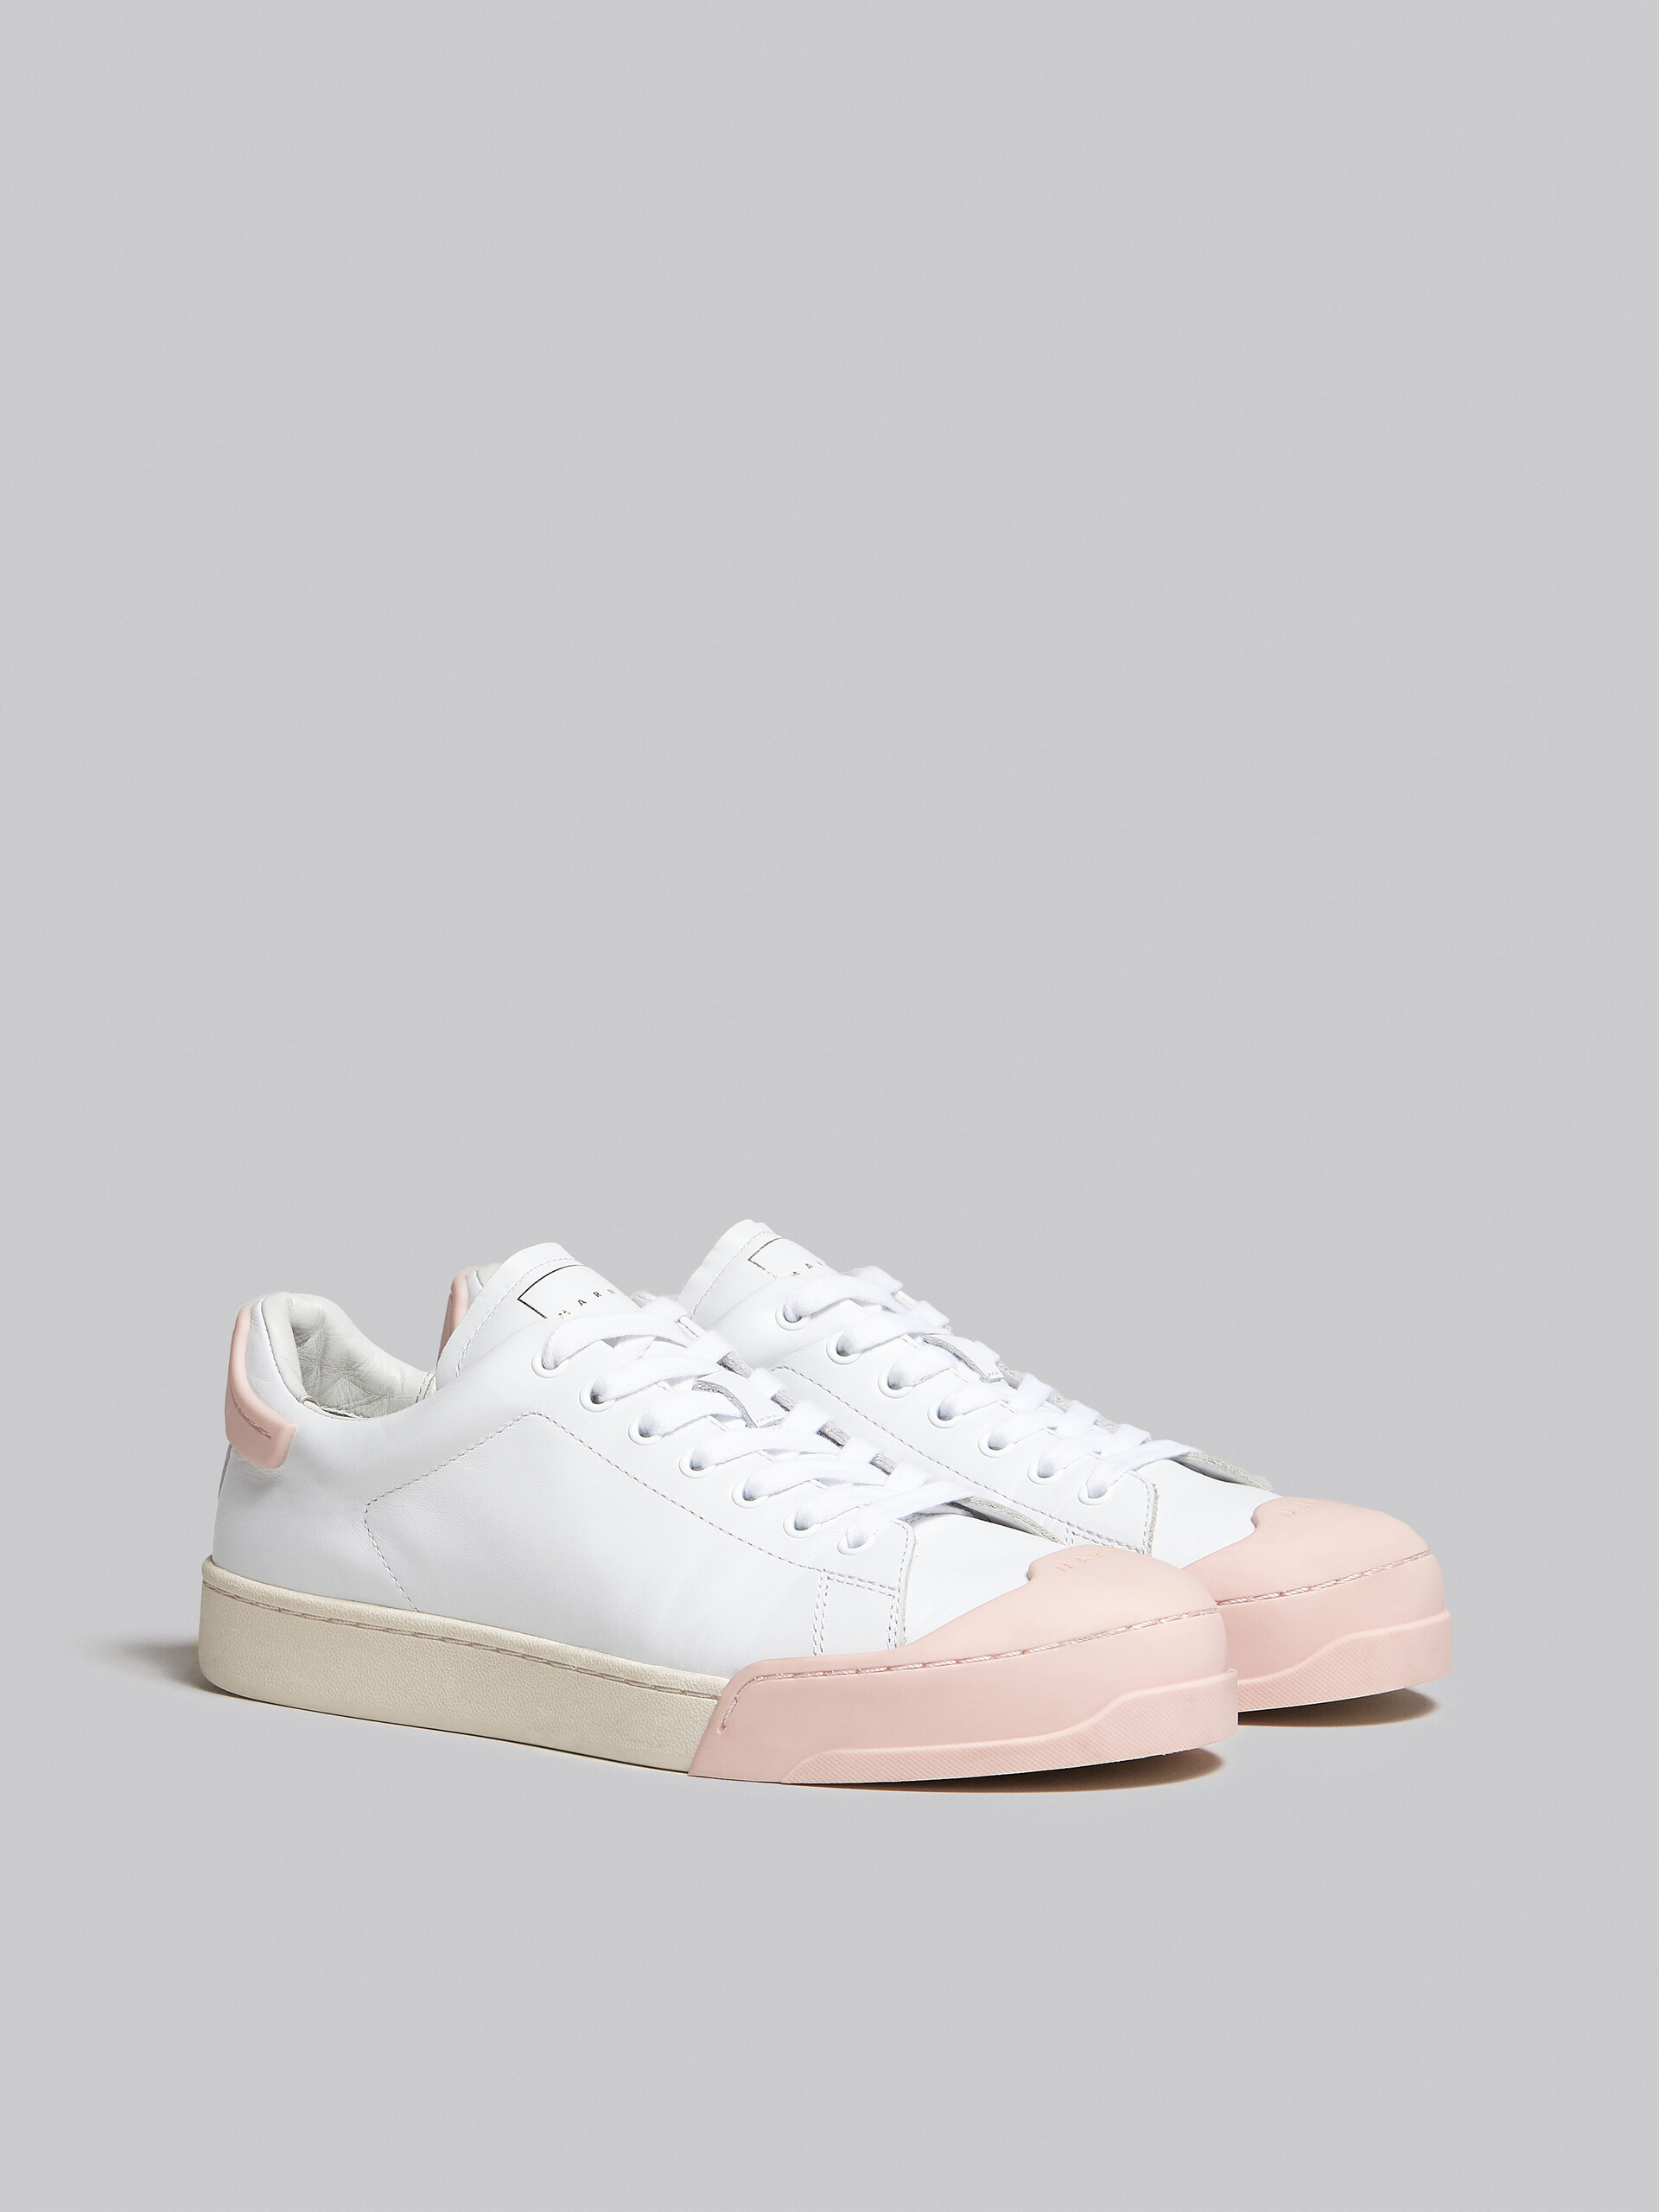 Dada Bumper sneaker in white and pink leather - Sneakers - Image 2